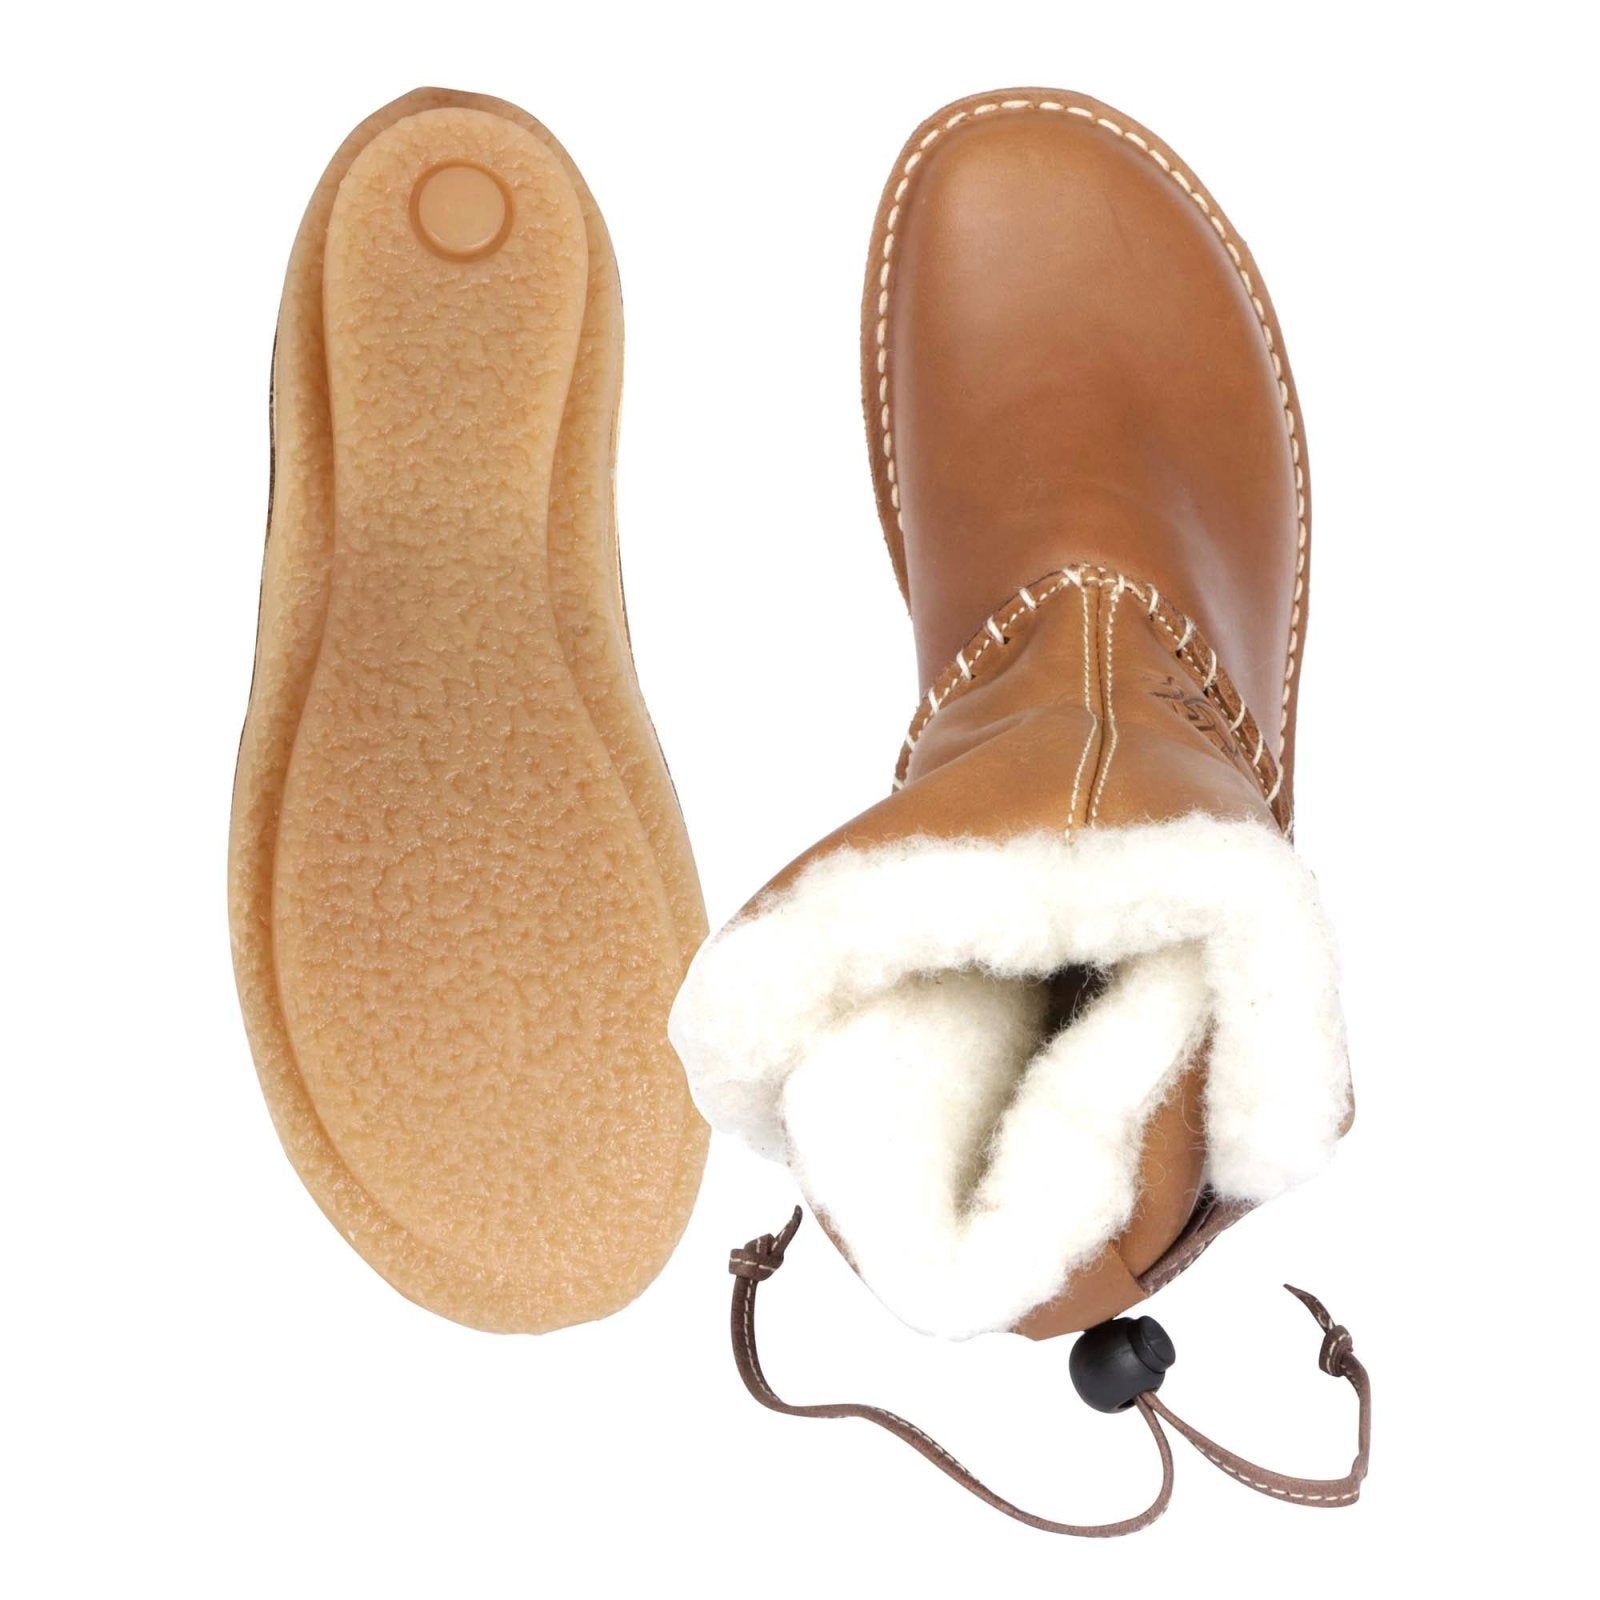 Freestyle Annabelle Locally Handcrafted 100% wool-lined premium leather boot - Freestyle SA Proudly local boots leather boots veldskoens vellies leather shoes suede veldskoens